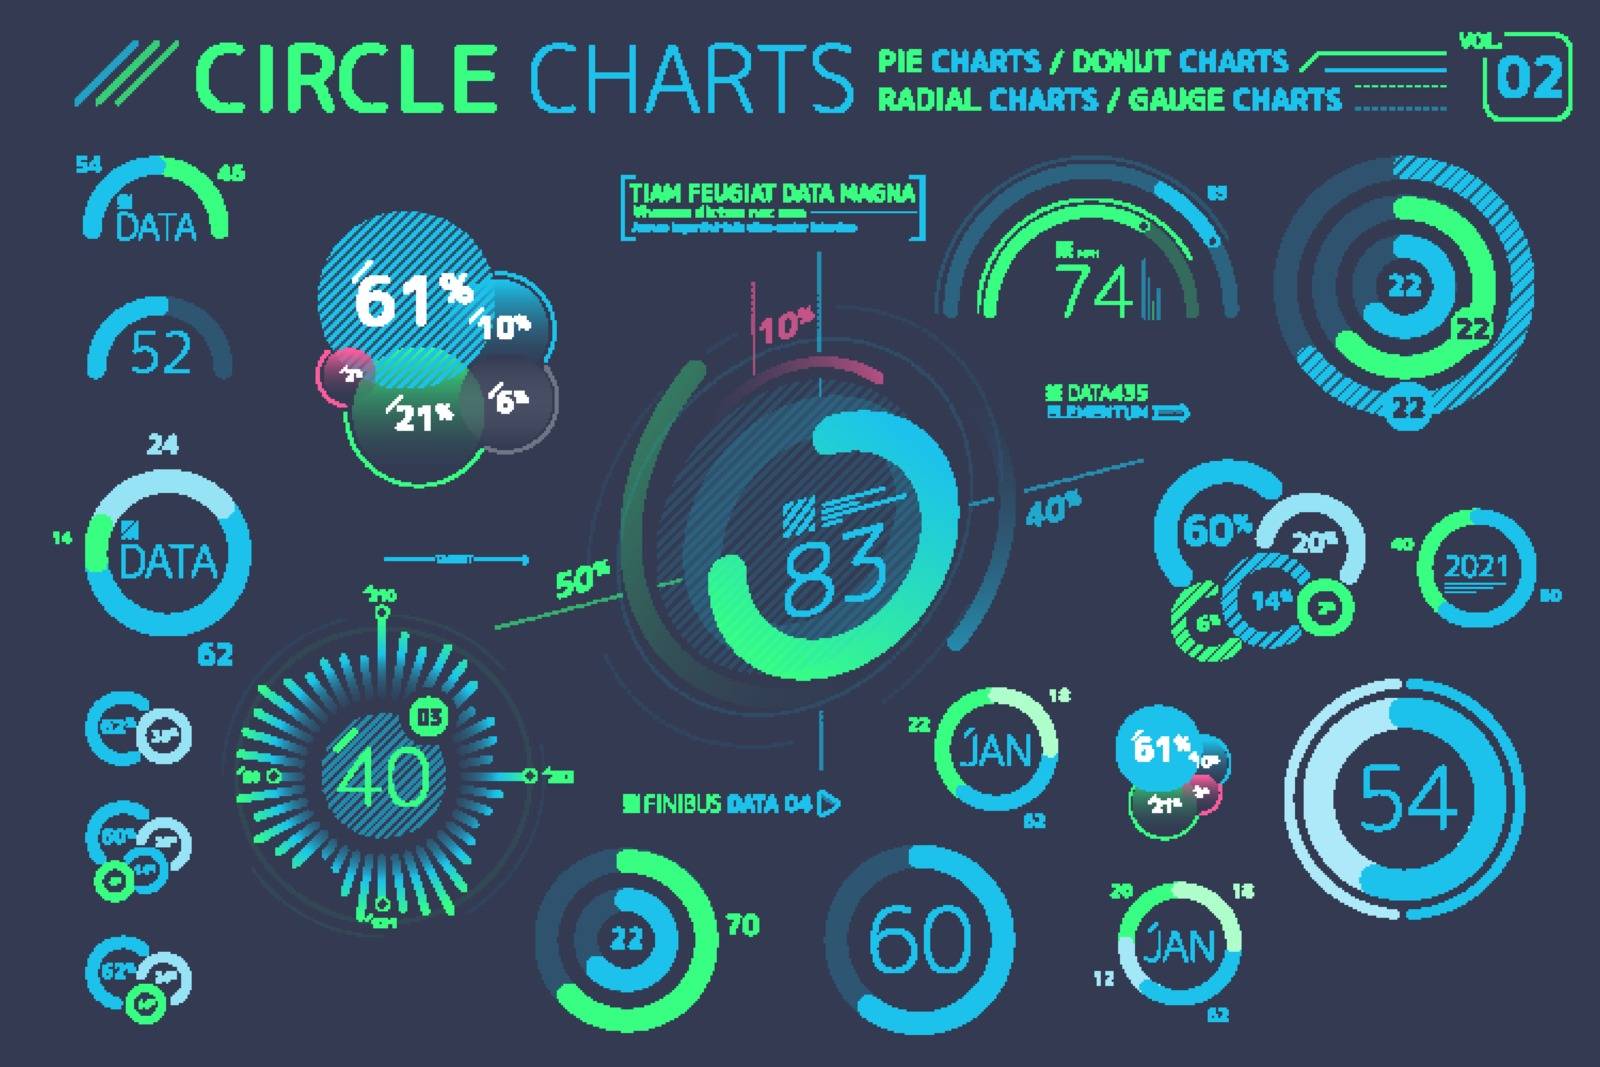 Corporate Infographic Elements is an excellent collection of vector graphs, charts and diagrams.